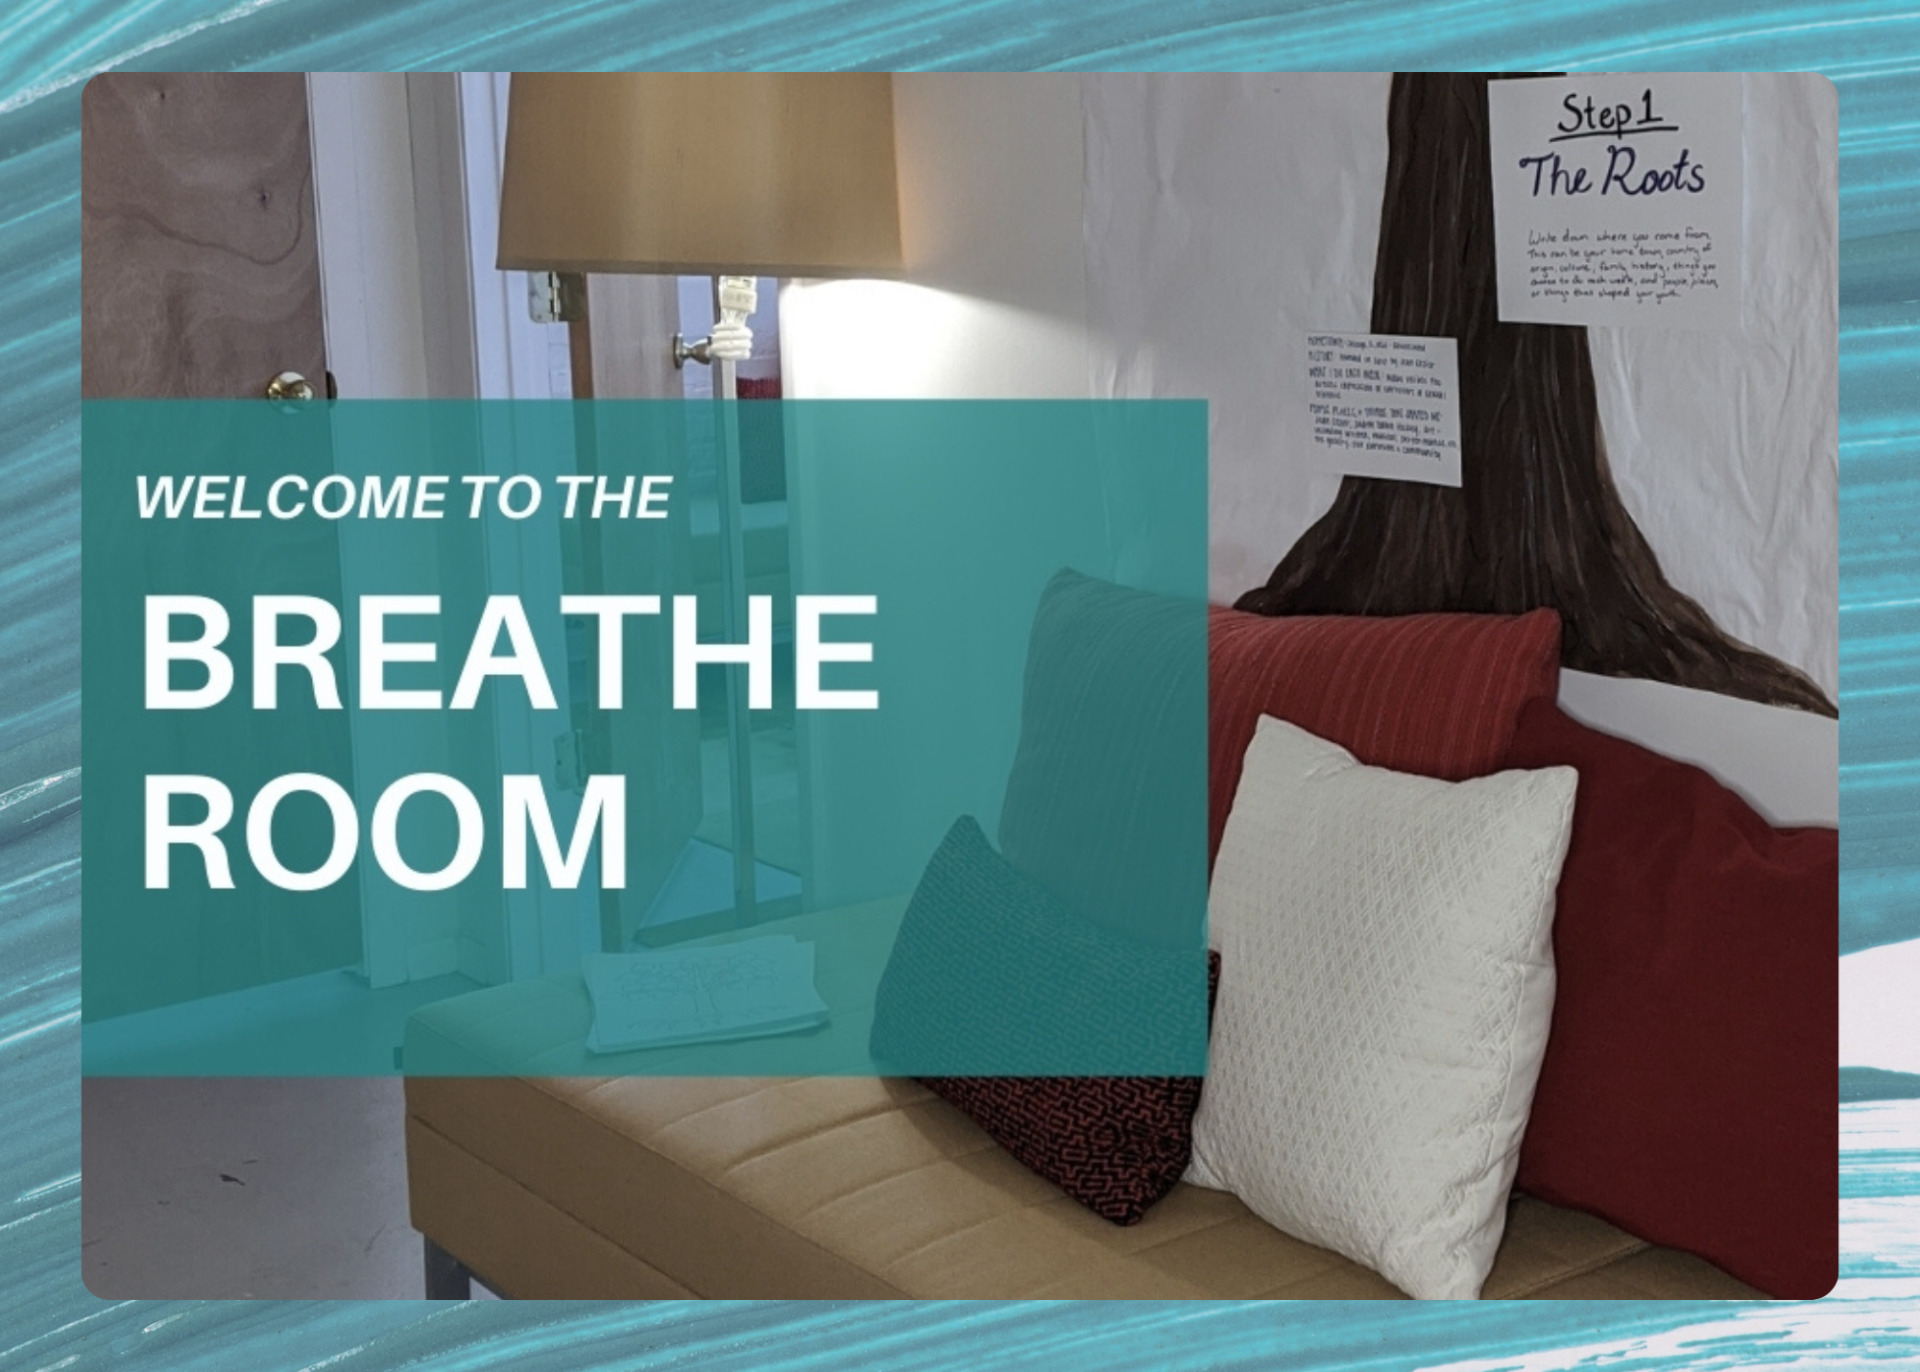 Text reads "Welcome to the breathe room" in white letters on a teal background. In the background a yellow couch with white and red pillows on it.